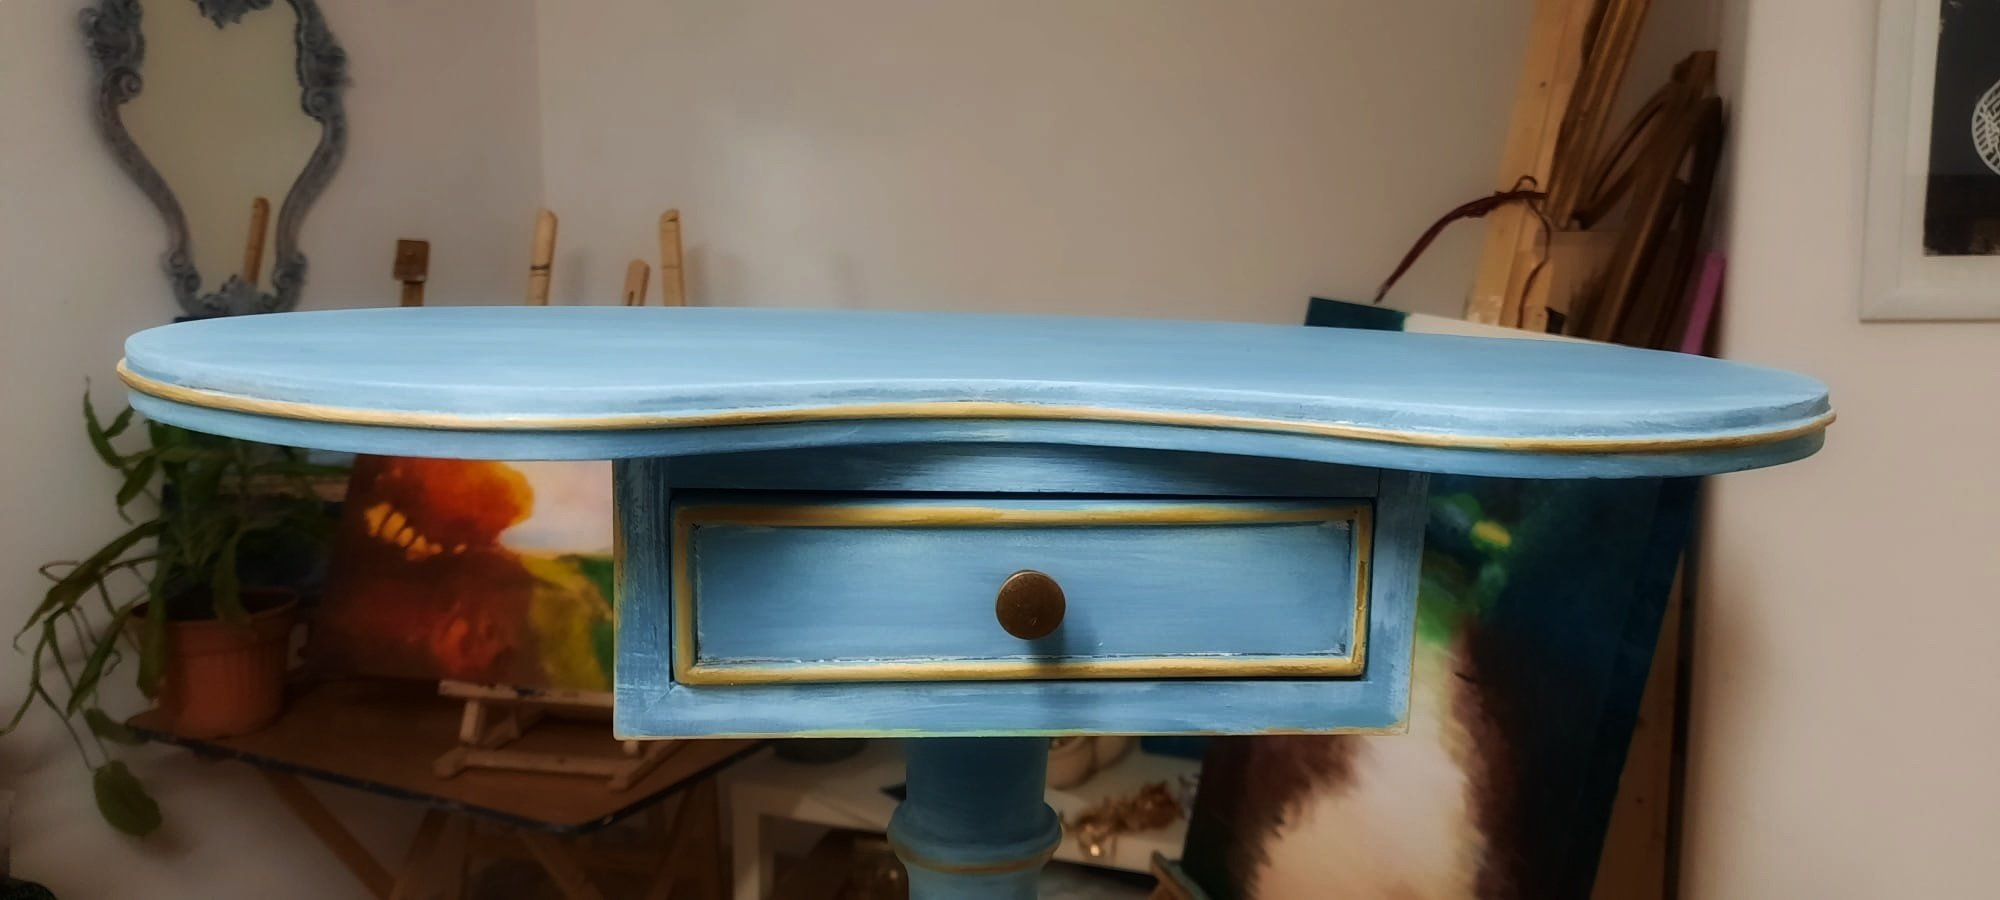 Everything is transformed, Restoration and decoration of an old piece of furniture